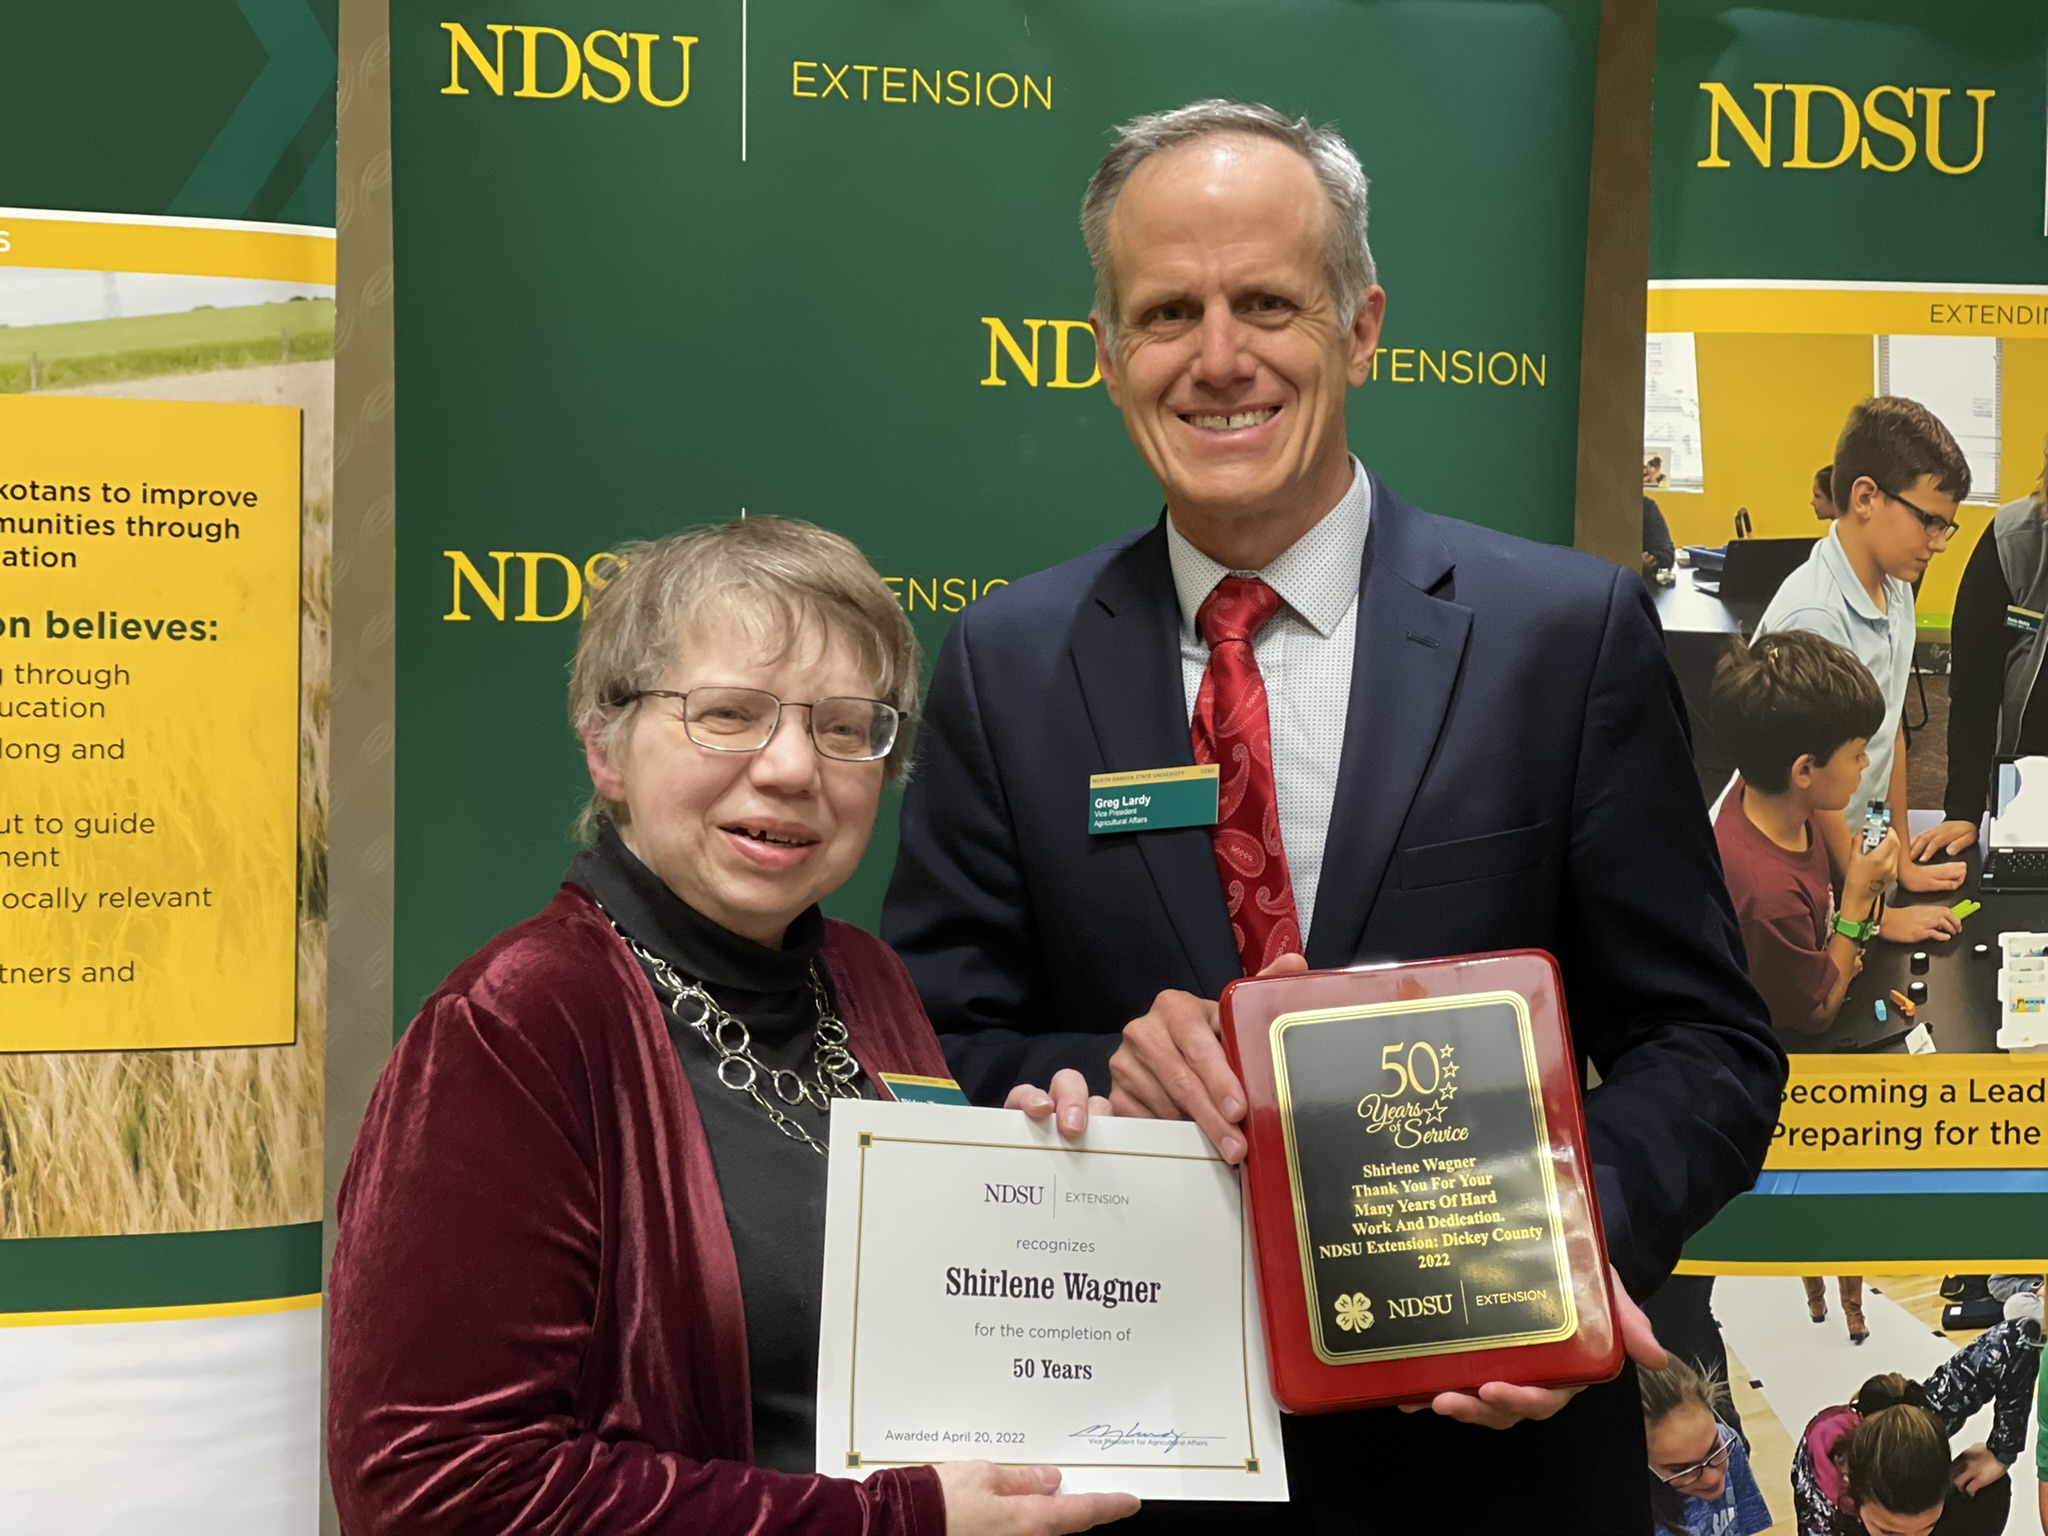 Shirlene Wagner, Dickey County, is honored for her 50 years of service to NDSU Extension. (NDSU photo)